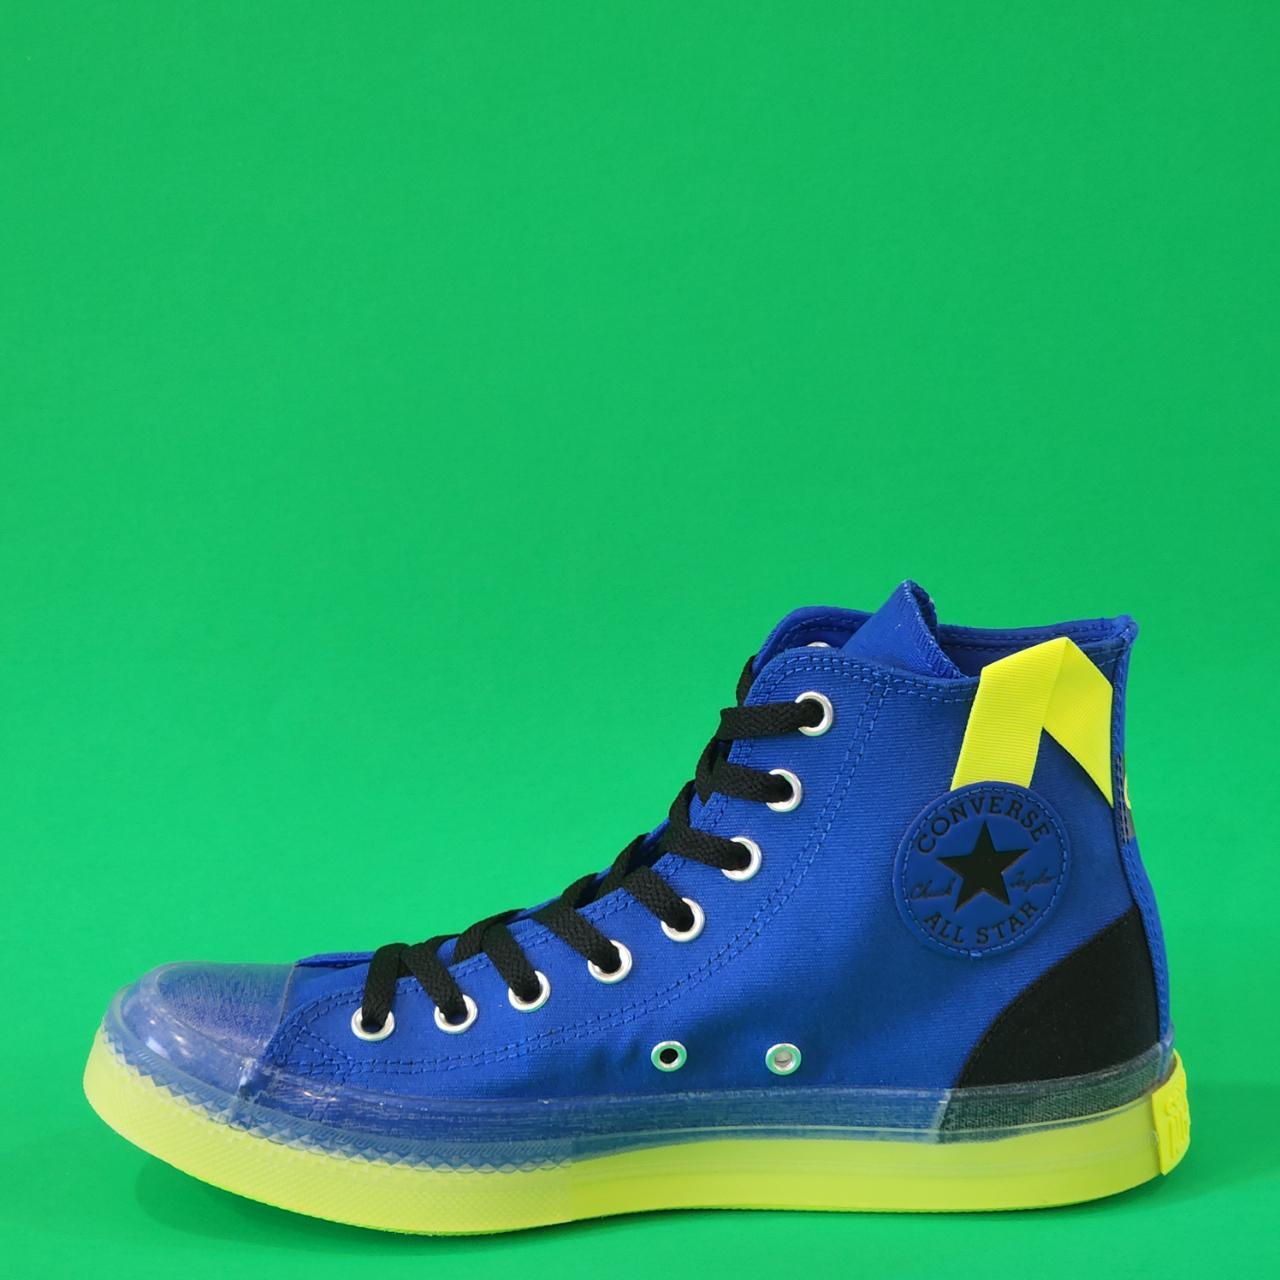 Converse Men's Blue and Yellow Trainers | Depop